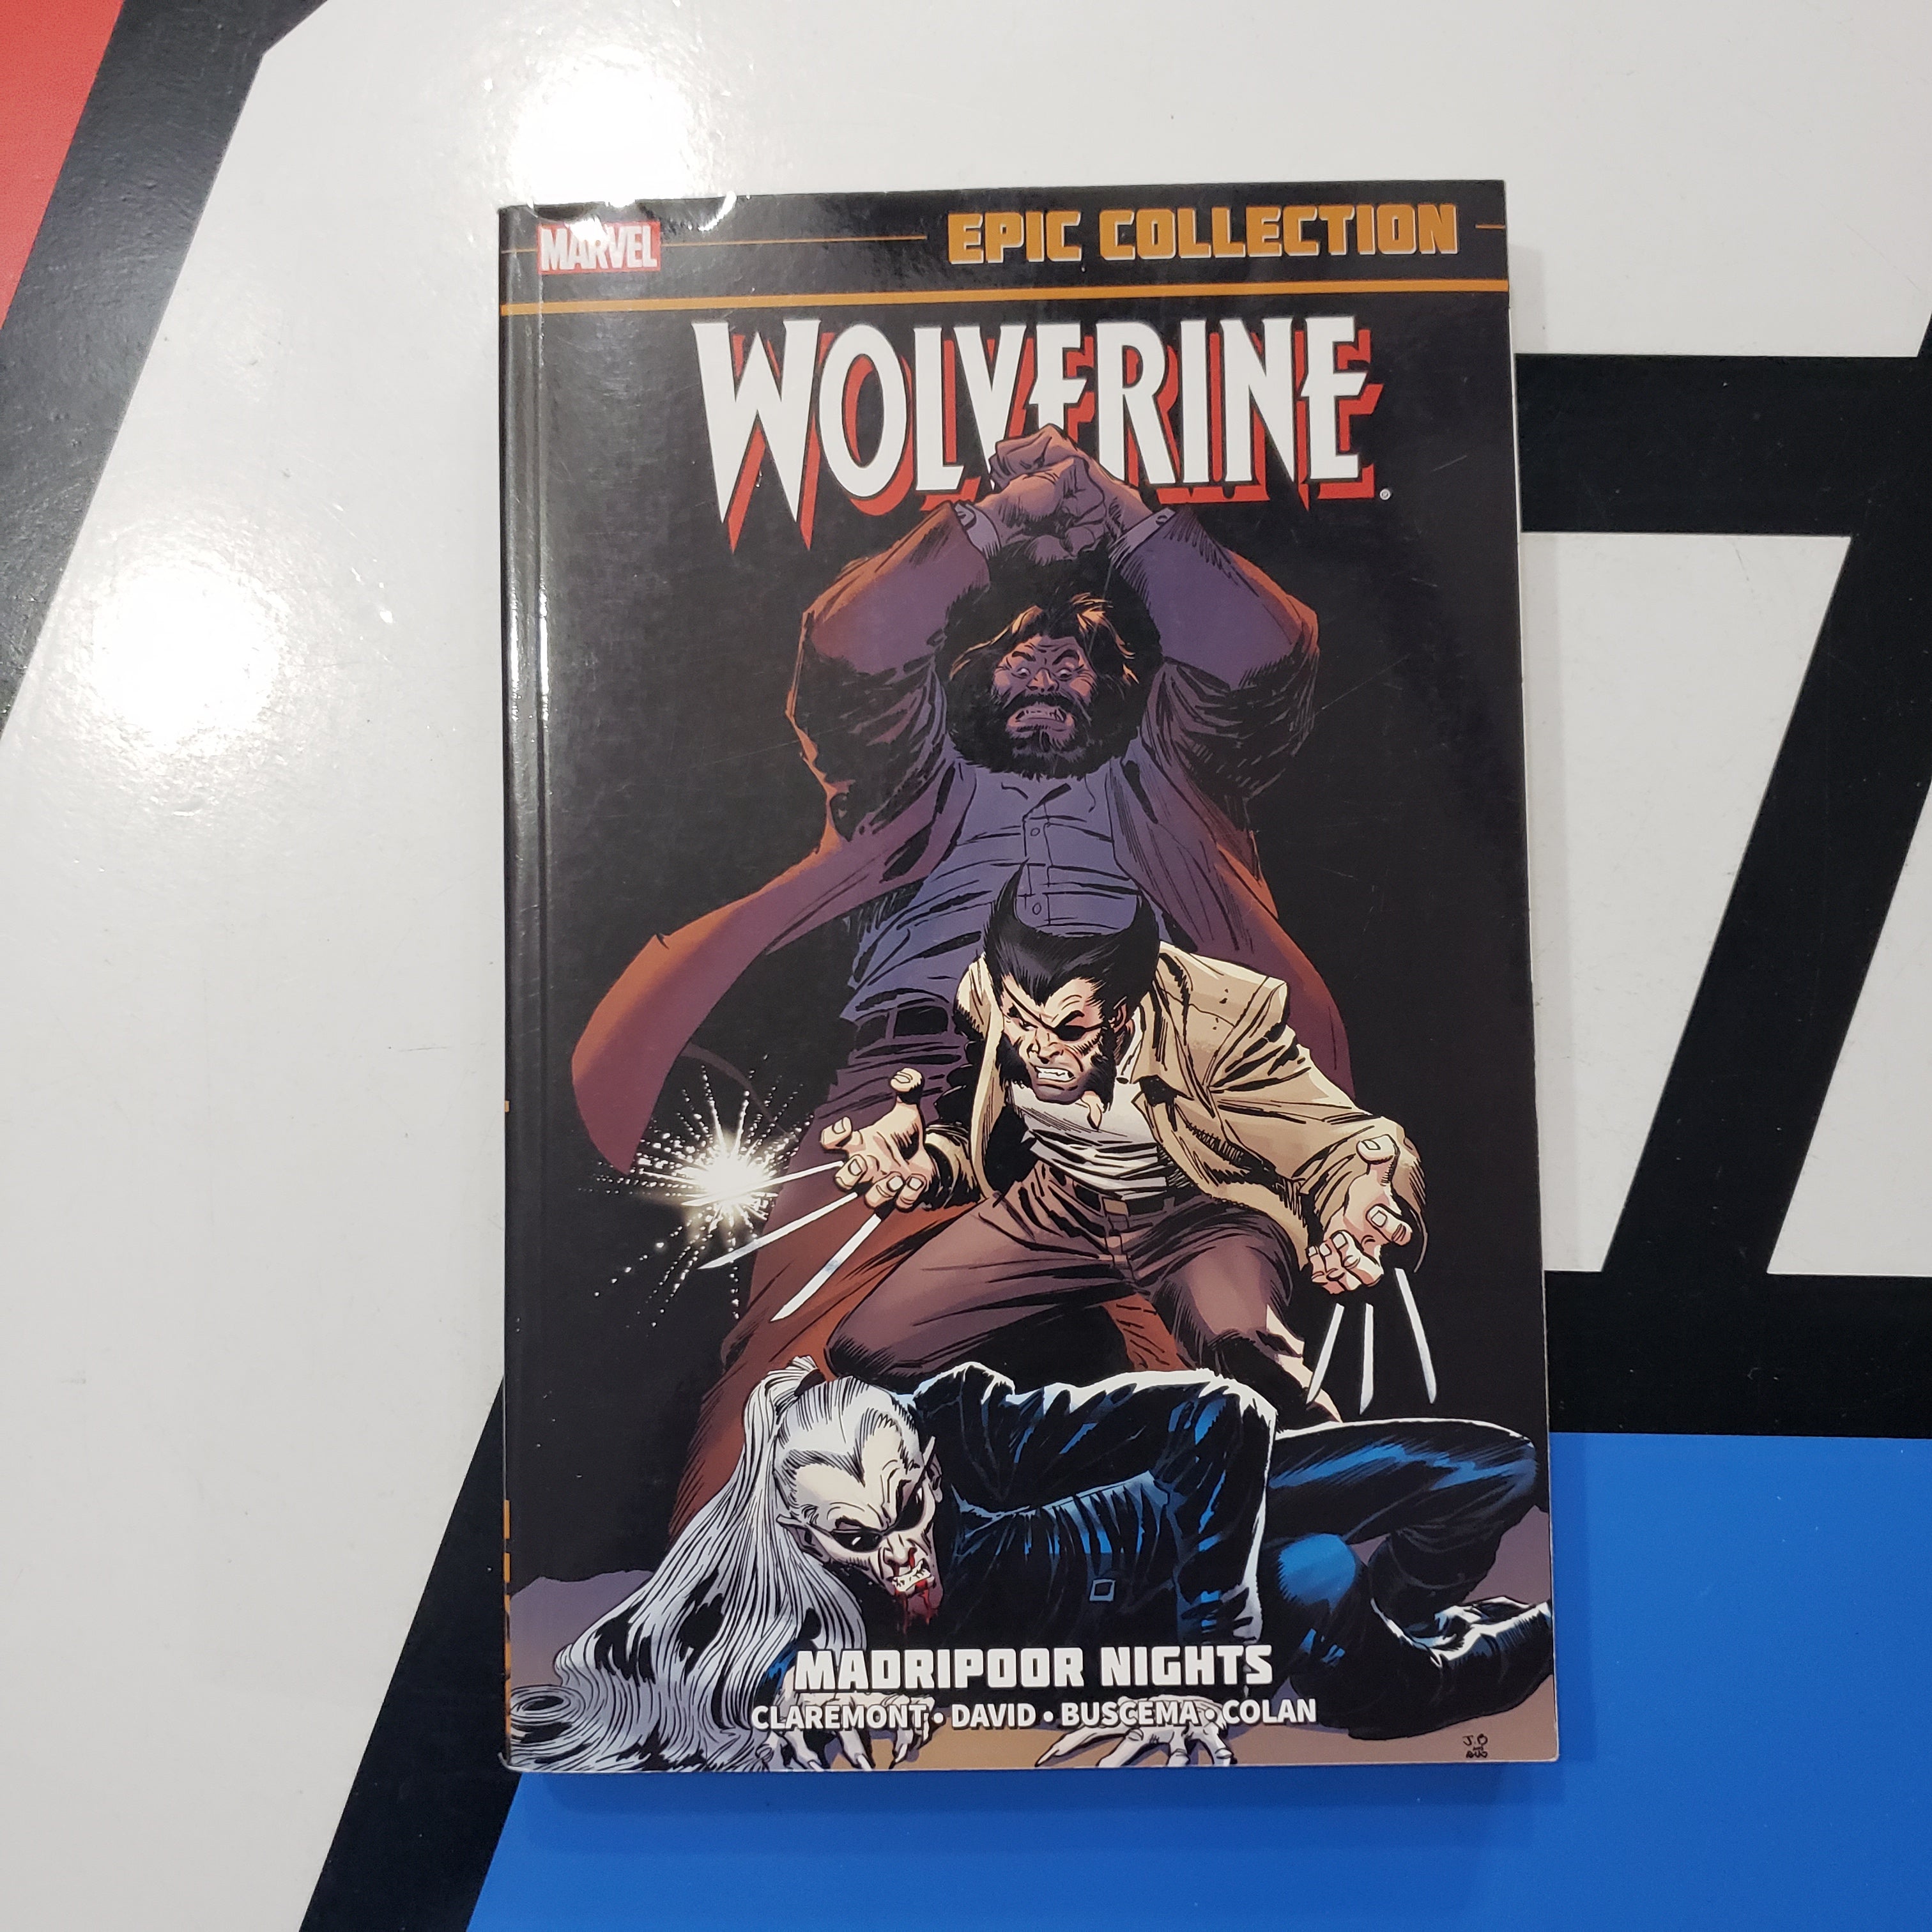 Epic Collection Wolverine Madripoor Nights Paperback Graphic Novel Mar ...